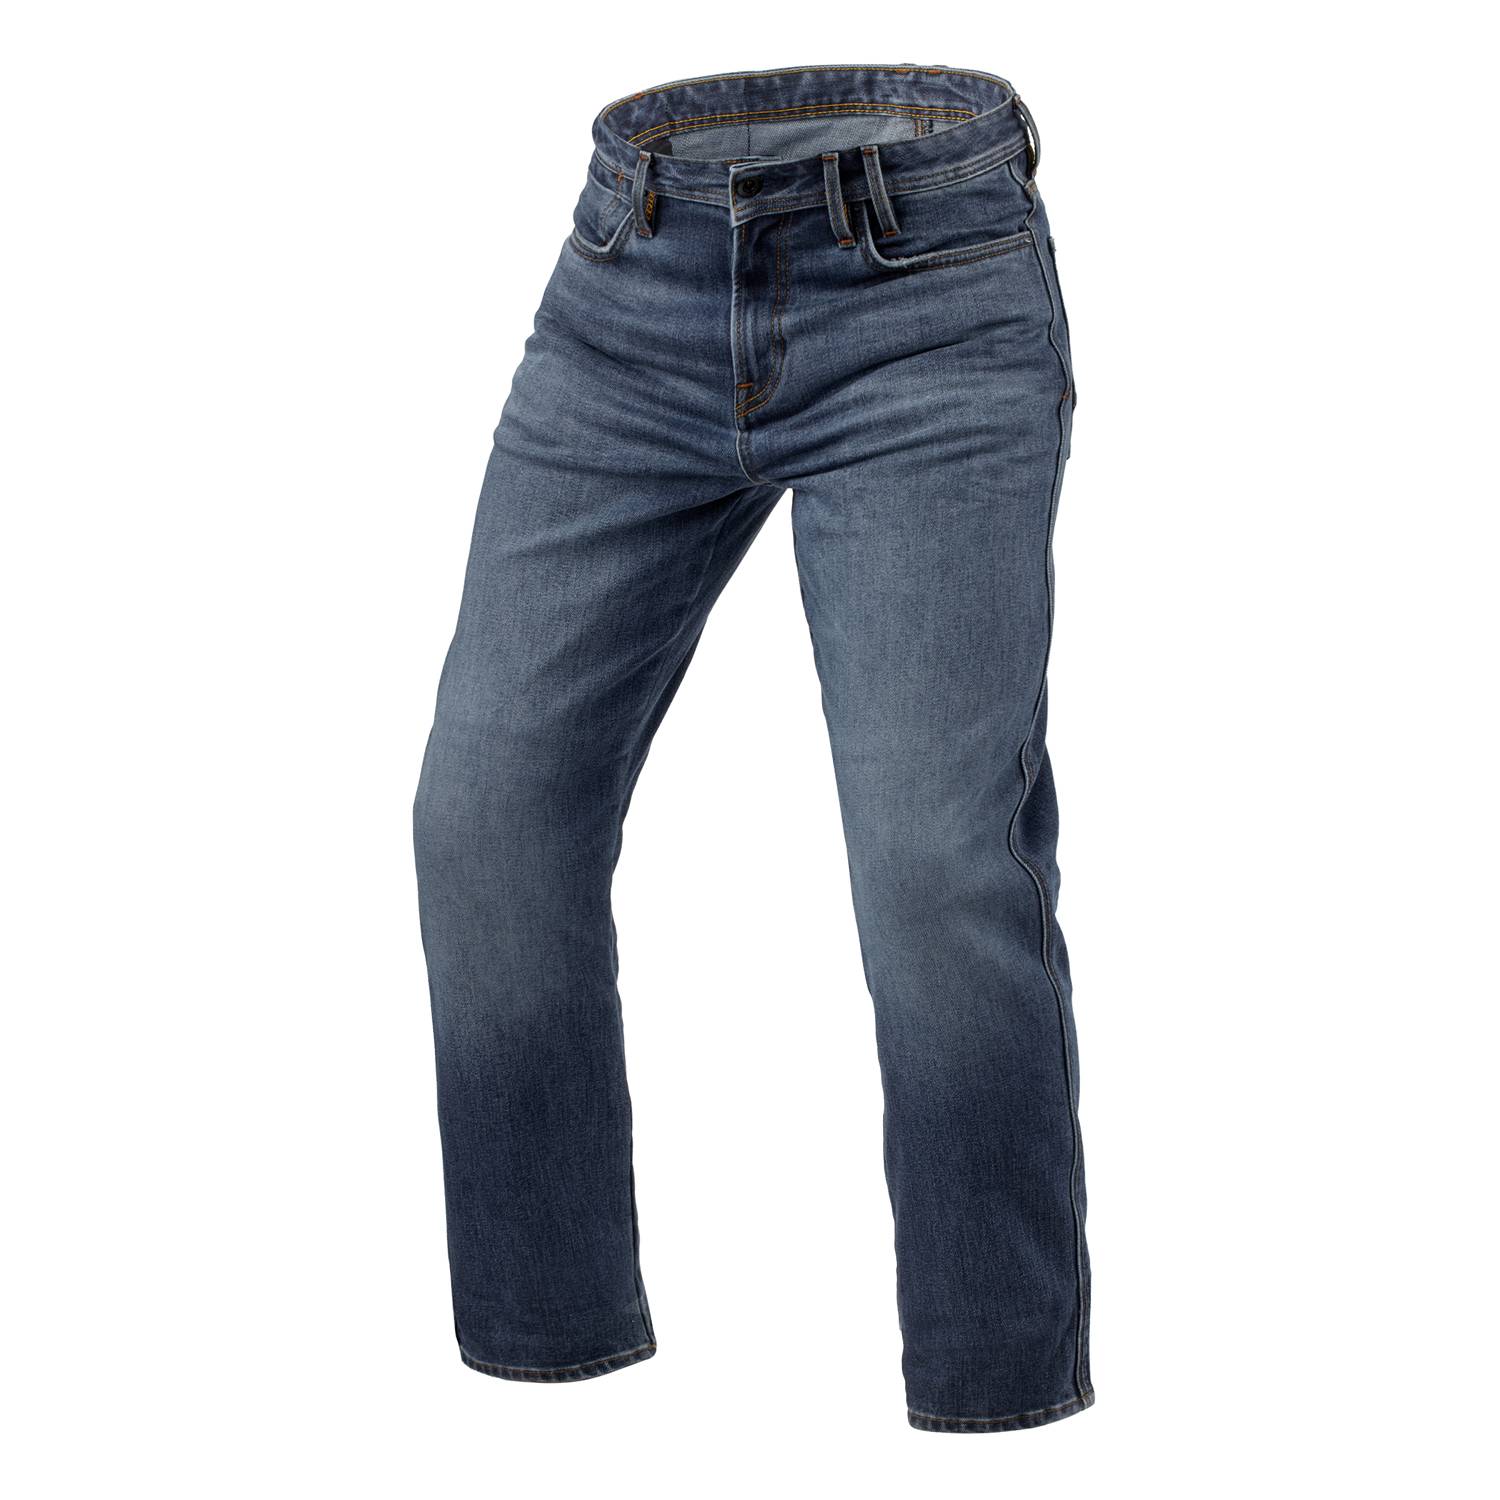 Image of REV'IT! Jeans Lombard 3 RF Medium Blue Stone L34 Motorcycle Jeans Size L34/W32 ID 8700001375962